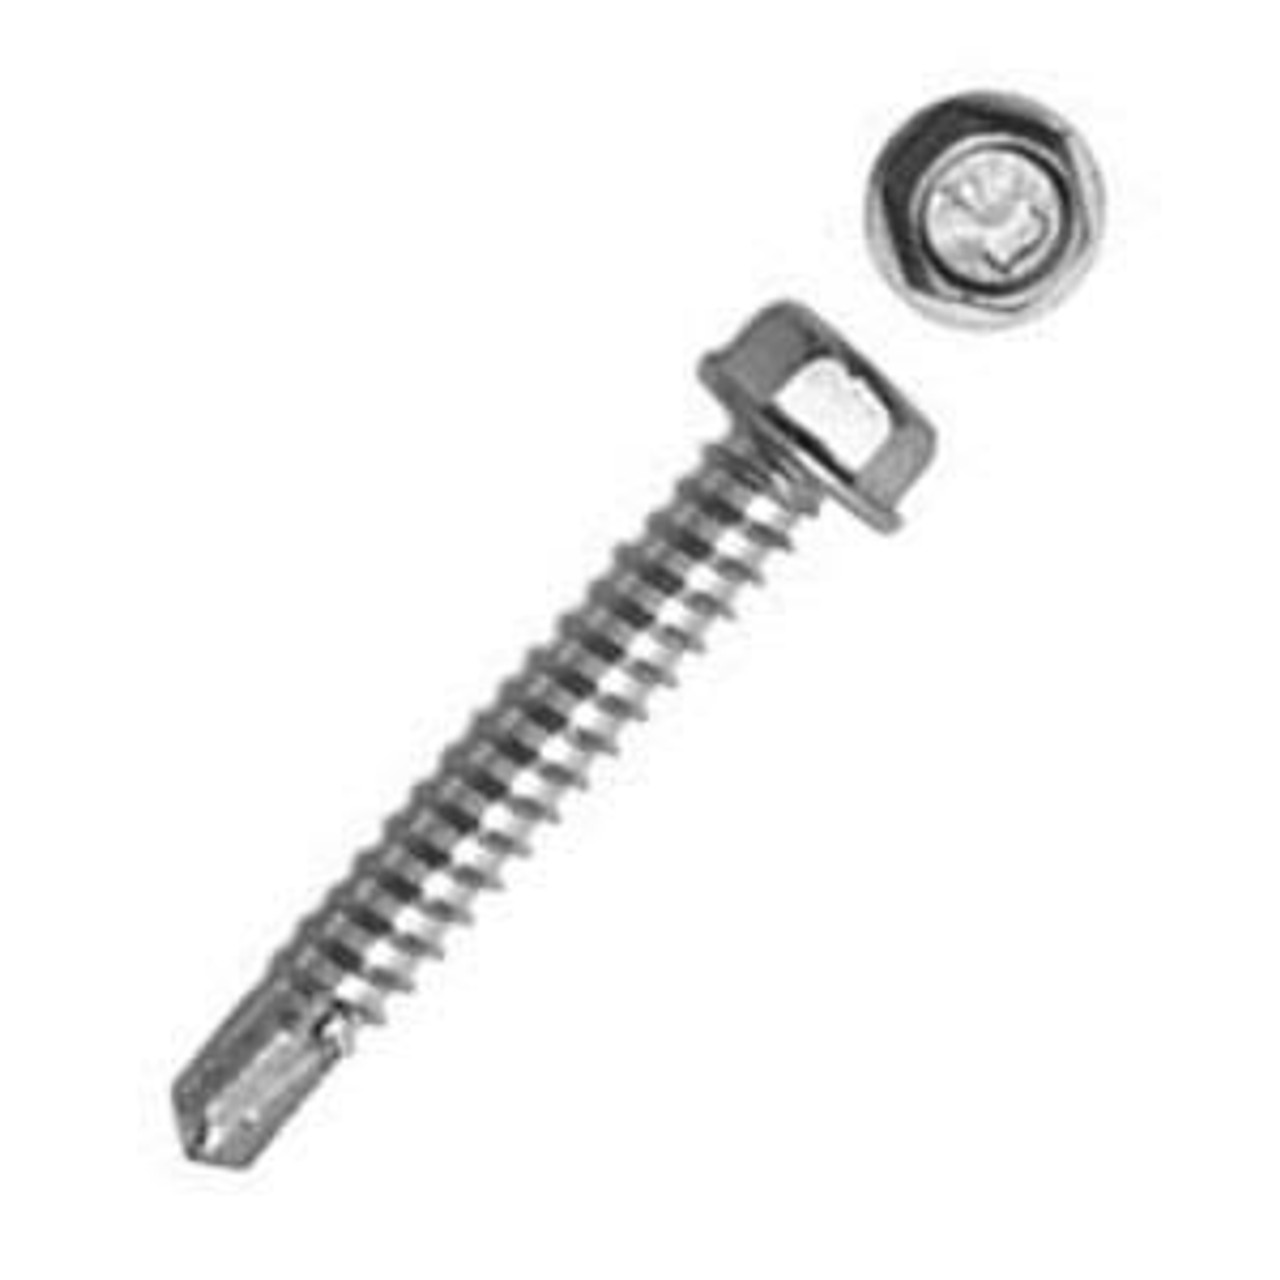 1 Length #2 Drill Point Combination Phillips-Slotted Drive Steel Self-Drilling Screw #8-18 Thread Size Pan Head Zinc Plated Finish Pack of 100 